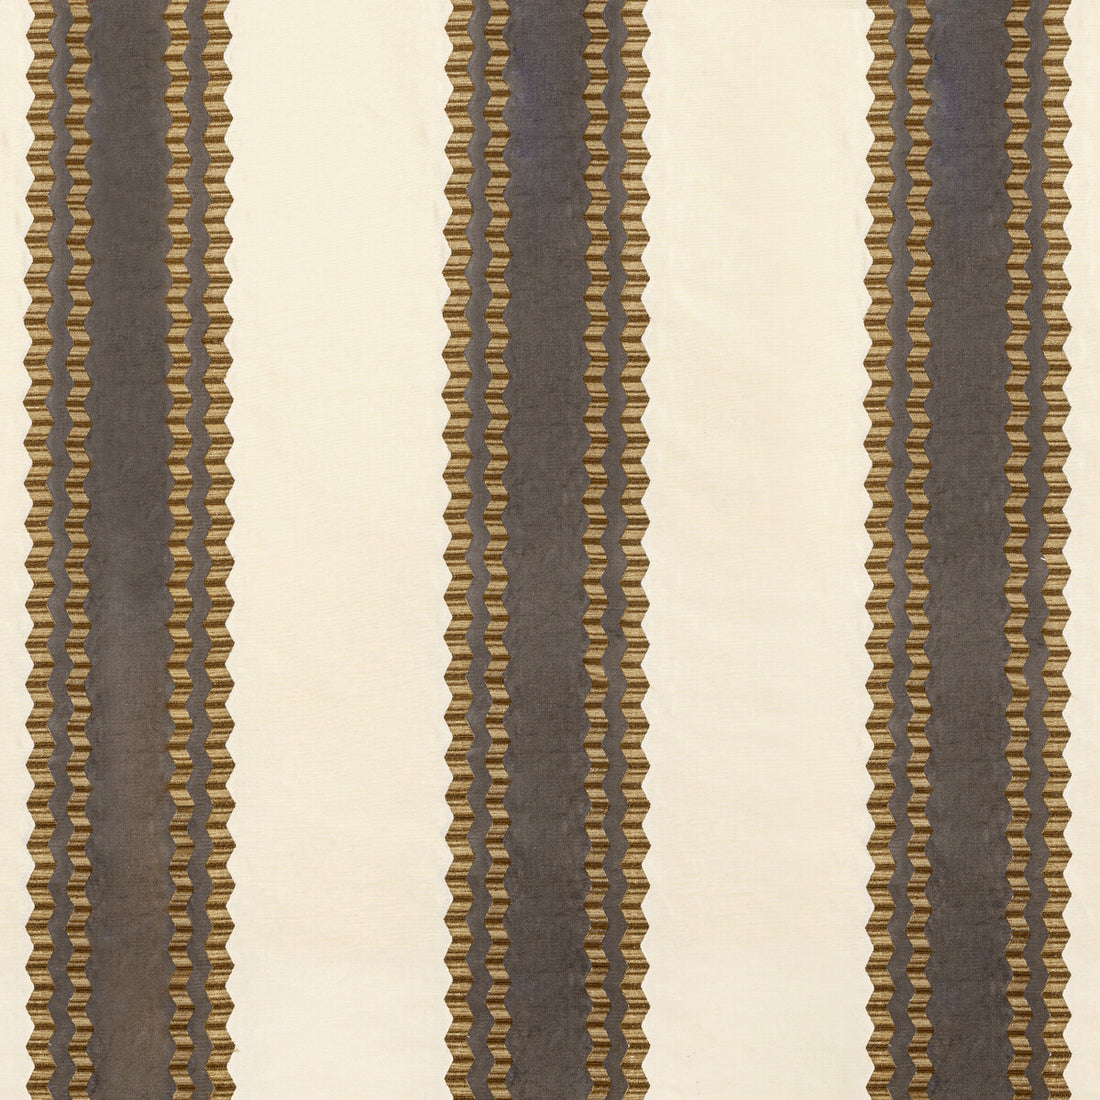 Waldon Stripe fabric in brown color - pattern 2022113.166.0 - by Lee Jofa in the Bunny Williams Arcadia collection